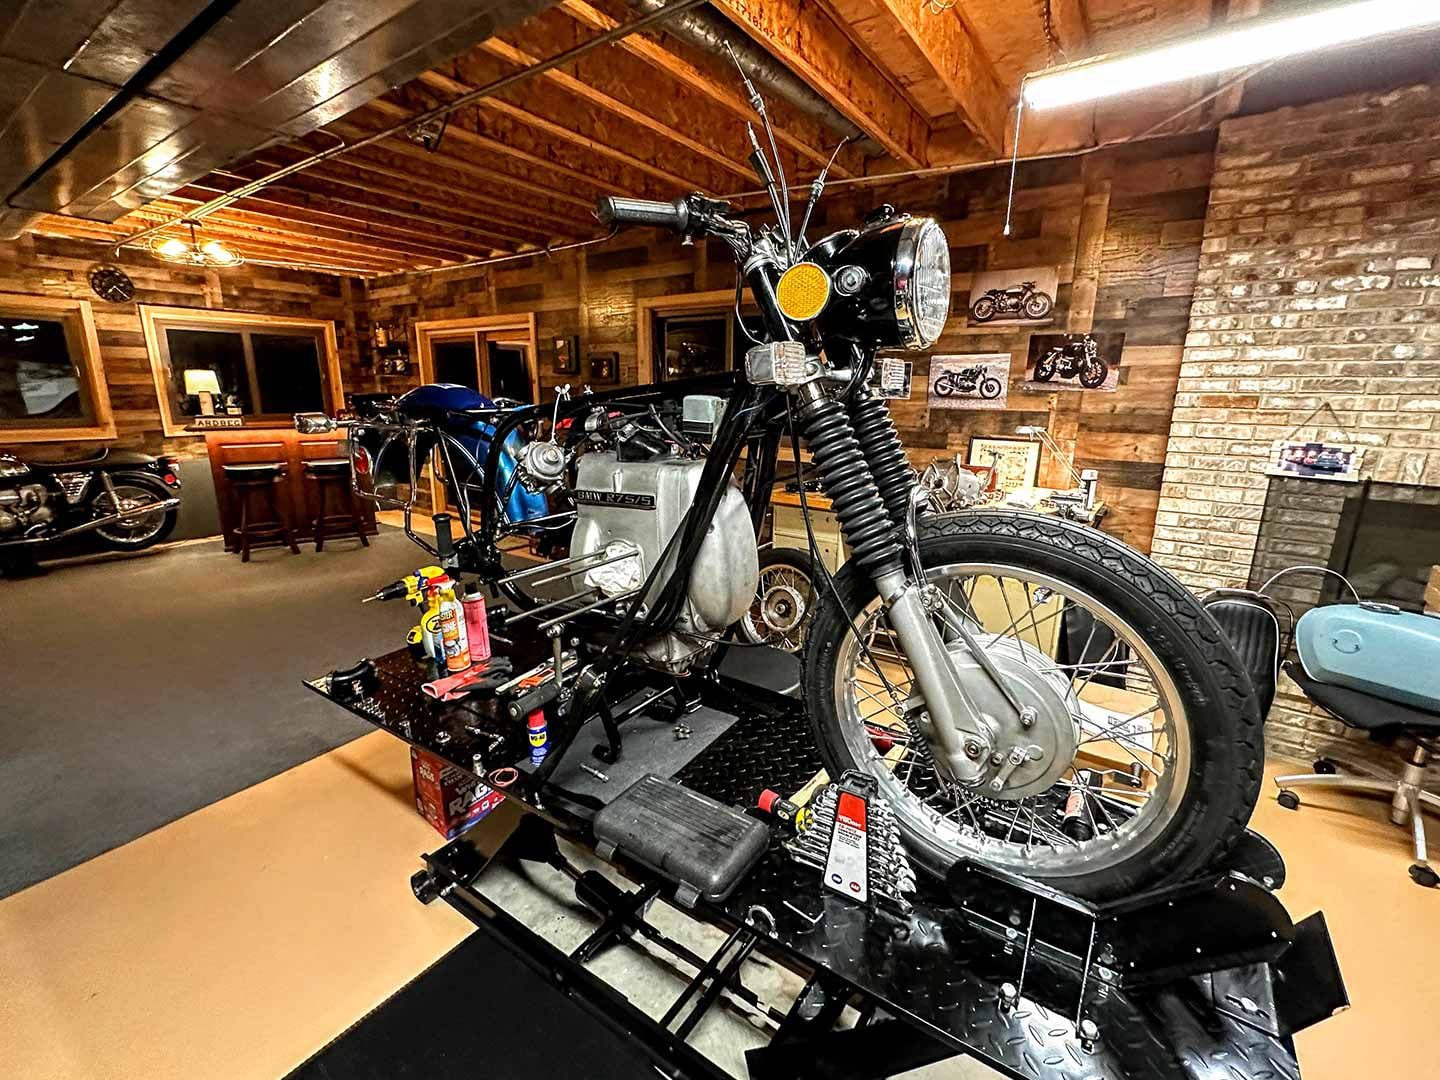 One of the tidier workspaces you’ll see: Nathan Hill’s in-house motorcycle shop space.